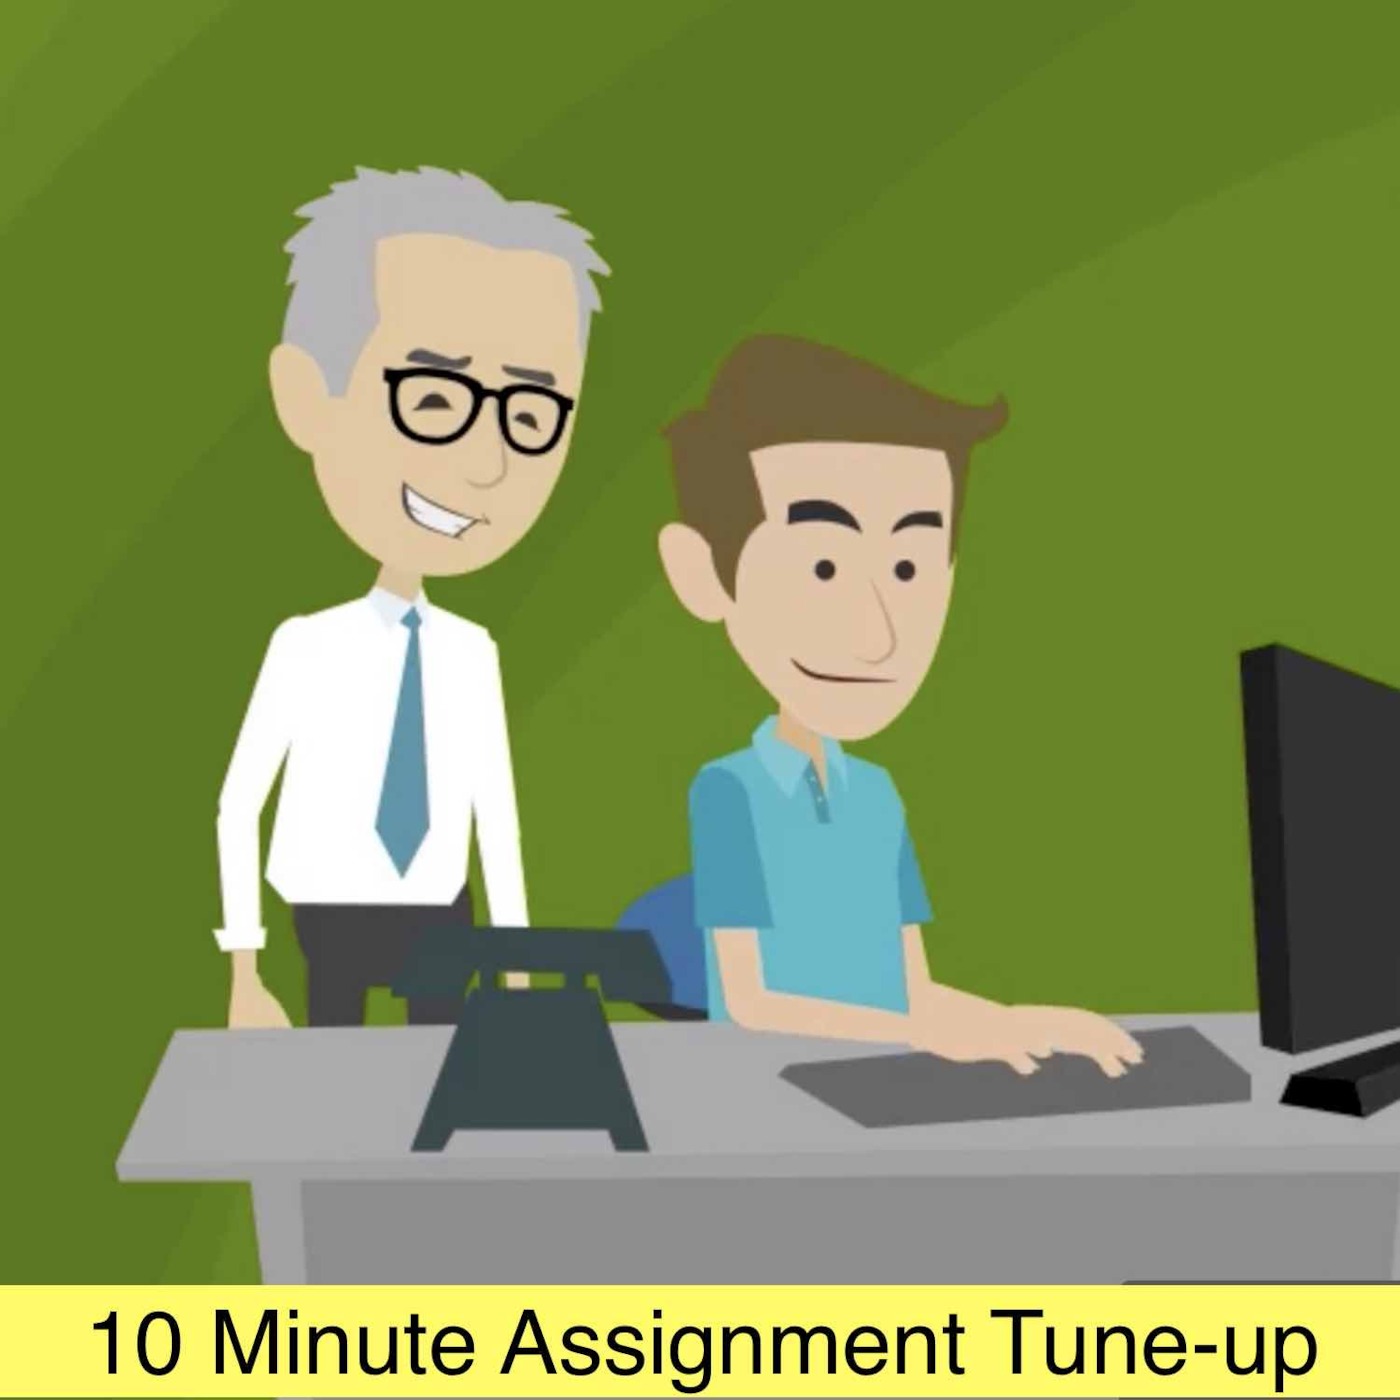 10 Minute Assignment Tune-up